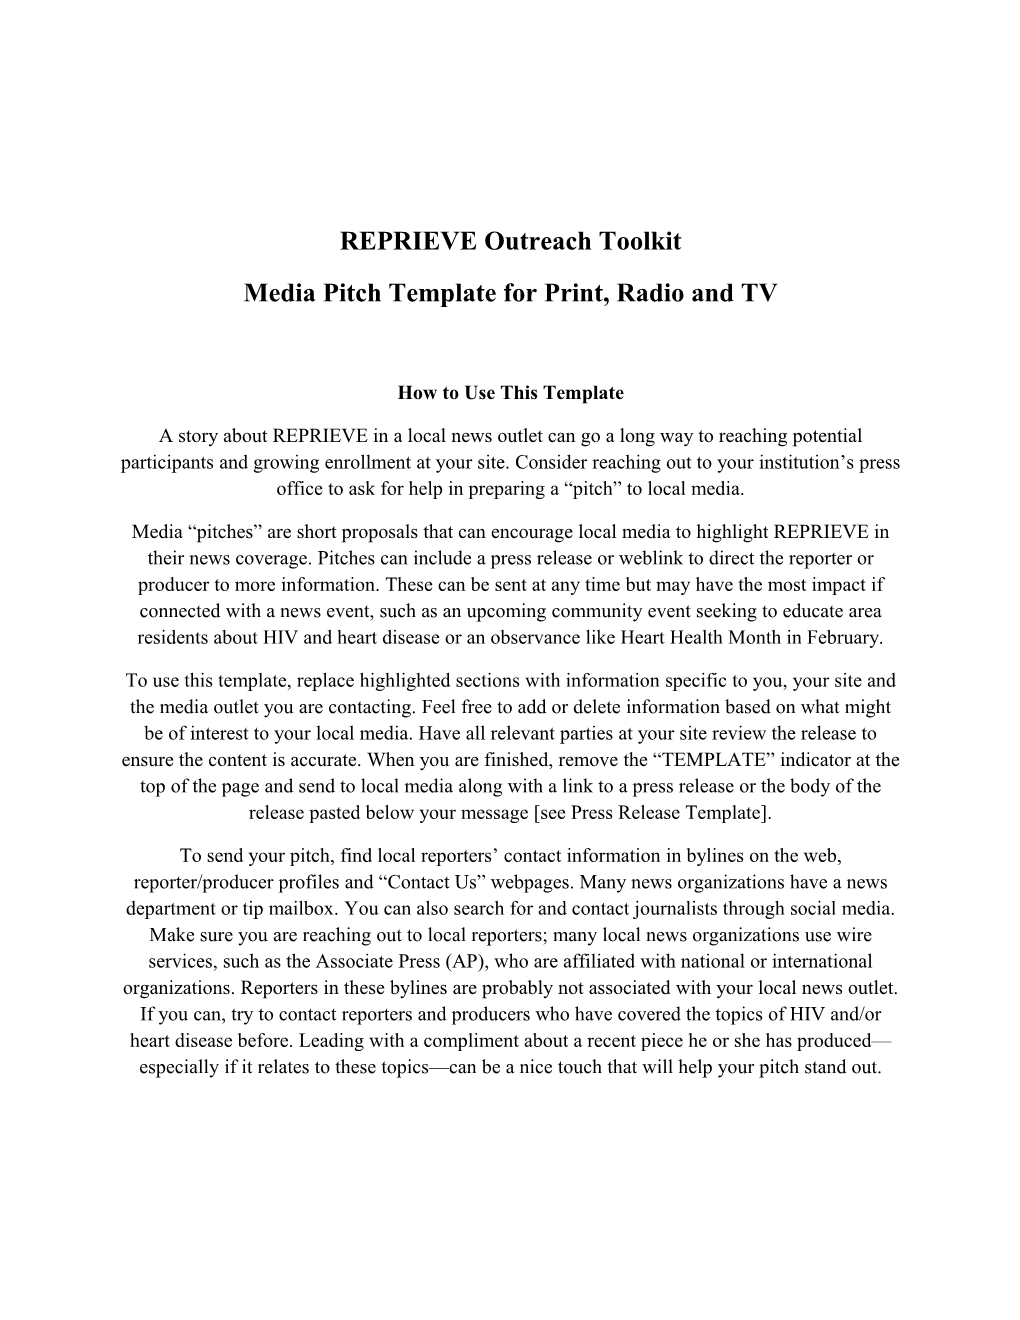 Media Pitch Template for Print, Radio and TV